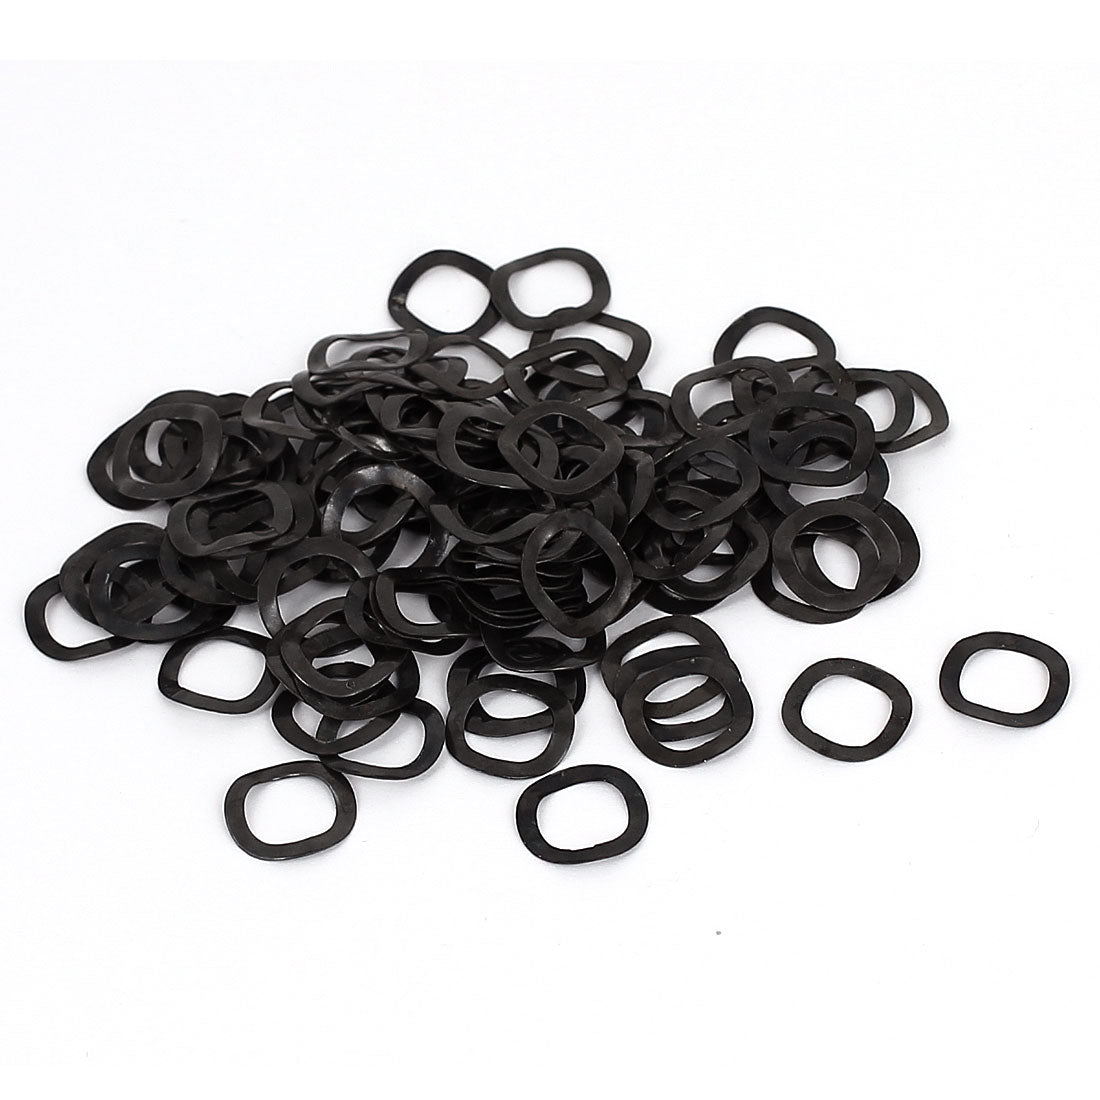 uxcell Uxcell 100pcs Black Metal Wavy Wave Crinkle Spring Washers 8mm x 12mm x 0.2mm